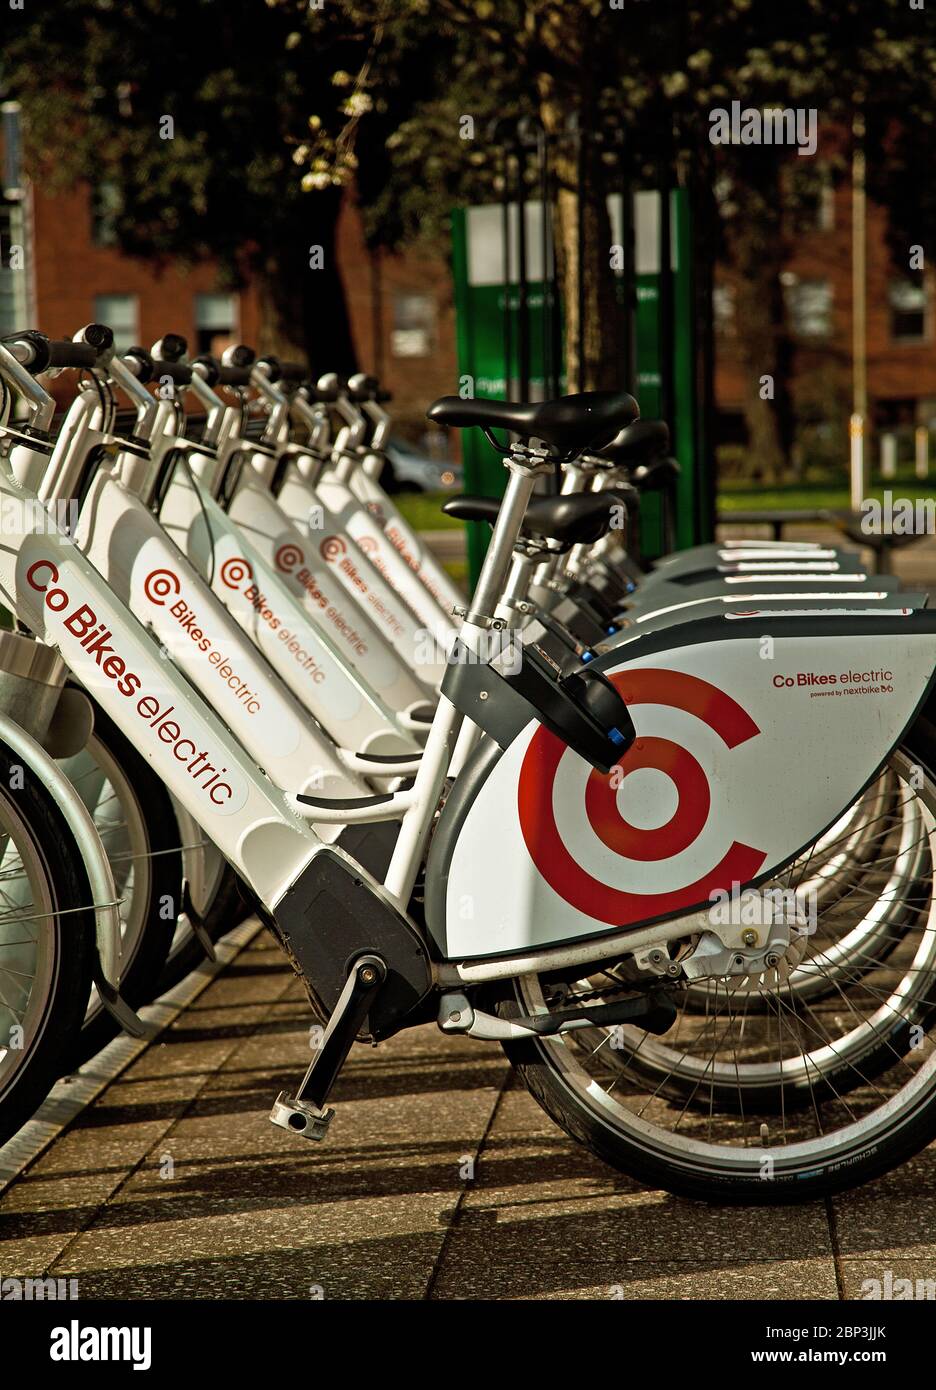 Co Bikes Electric Bicycles ready for hire Stock Photo